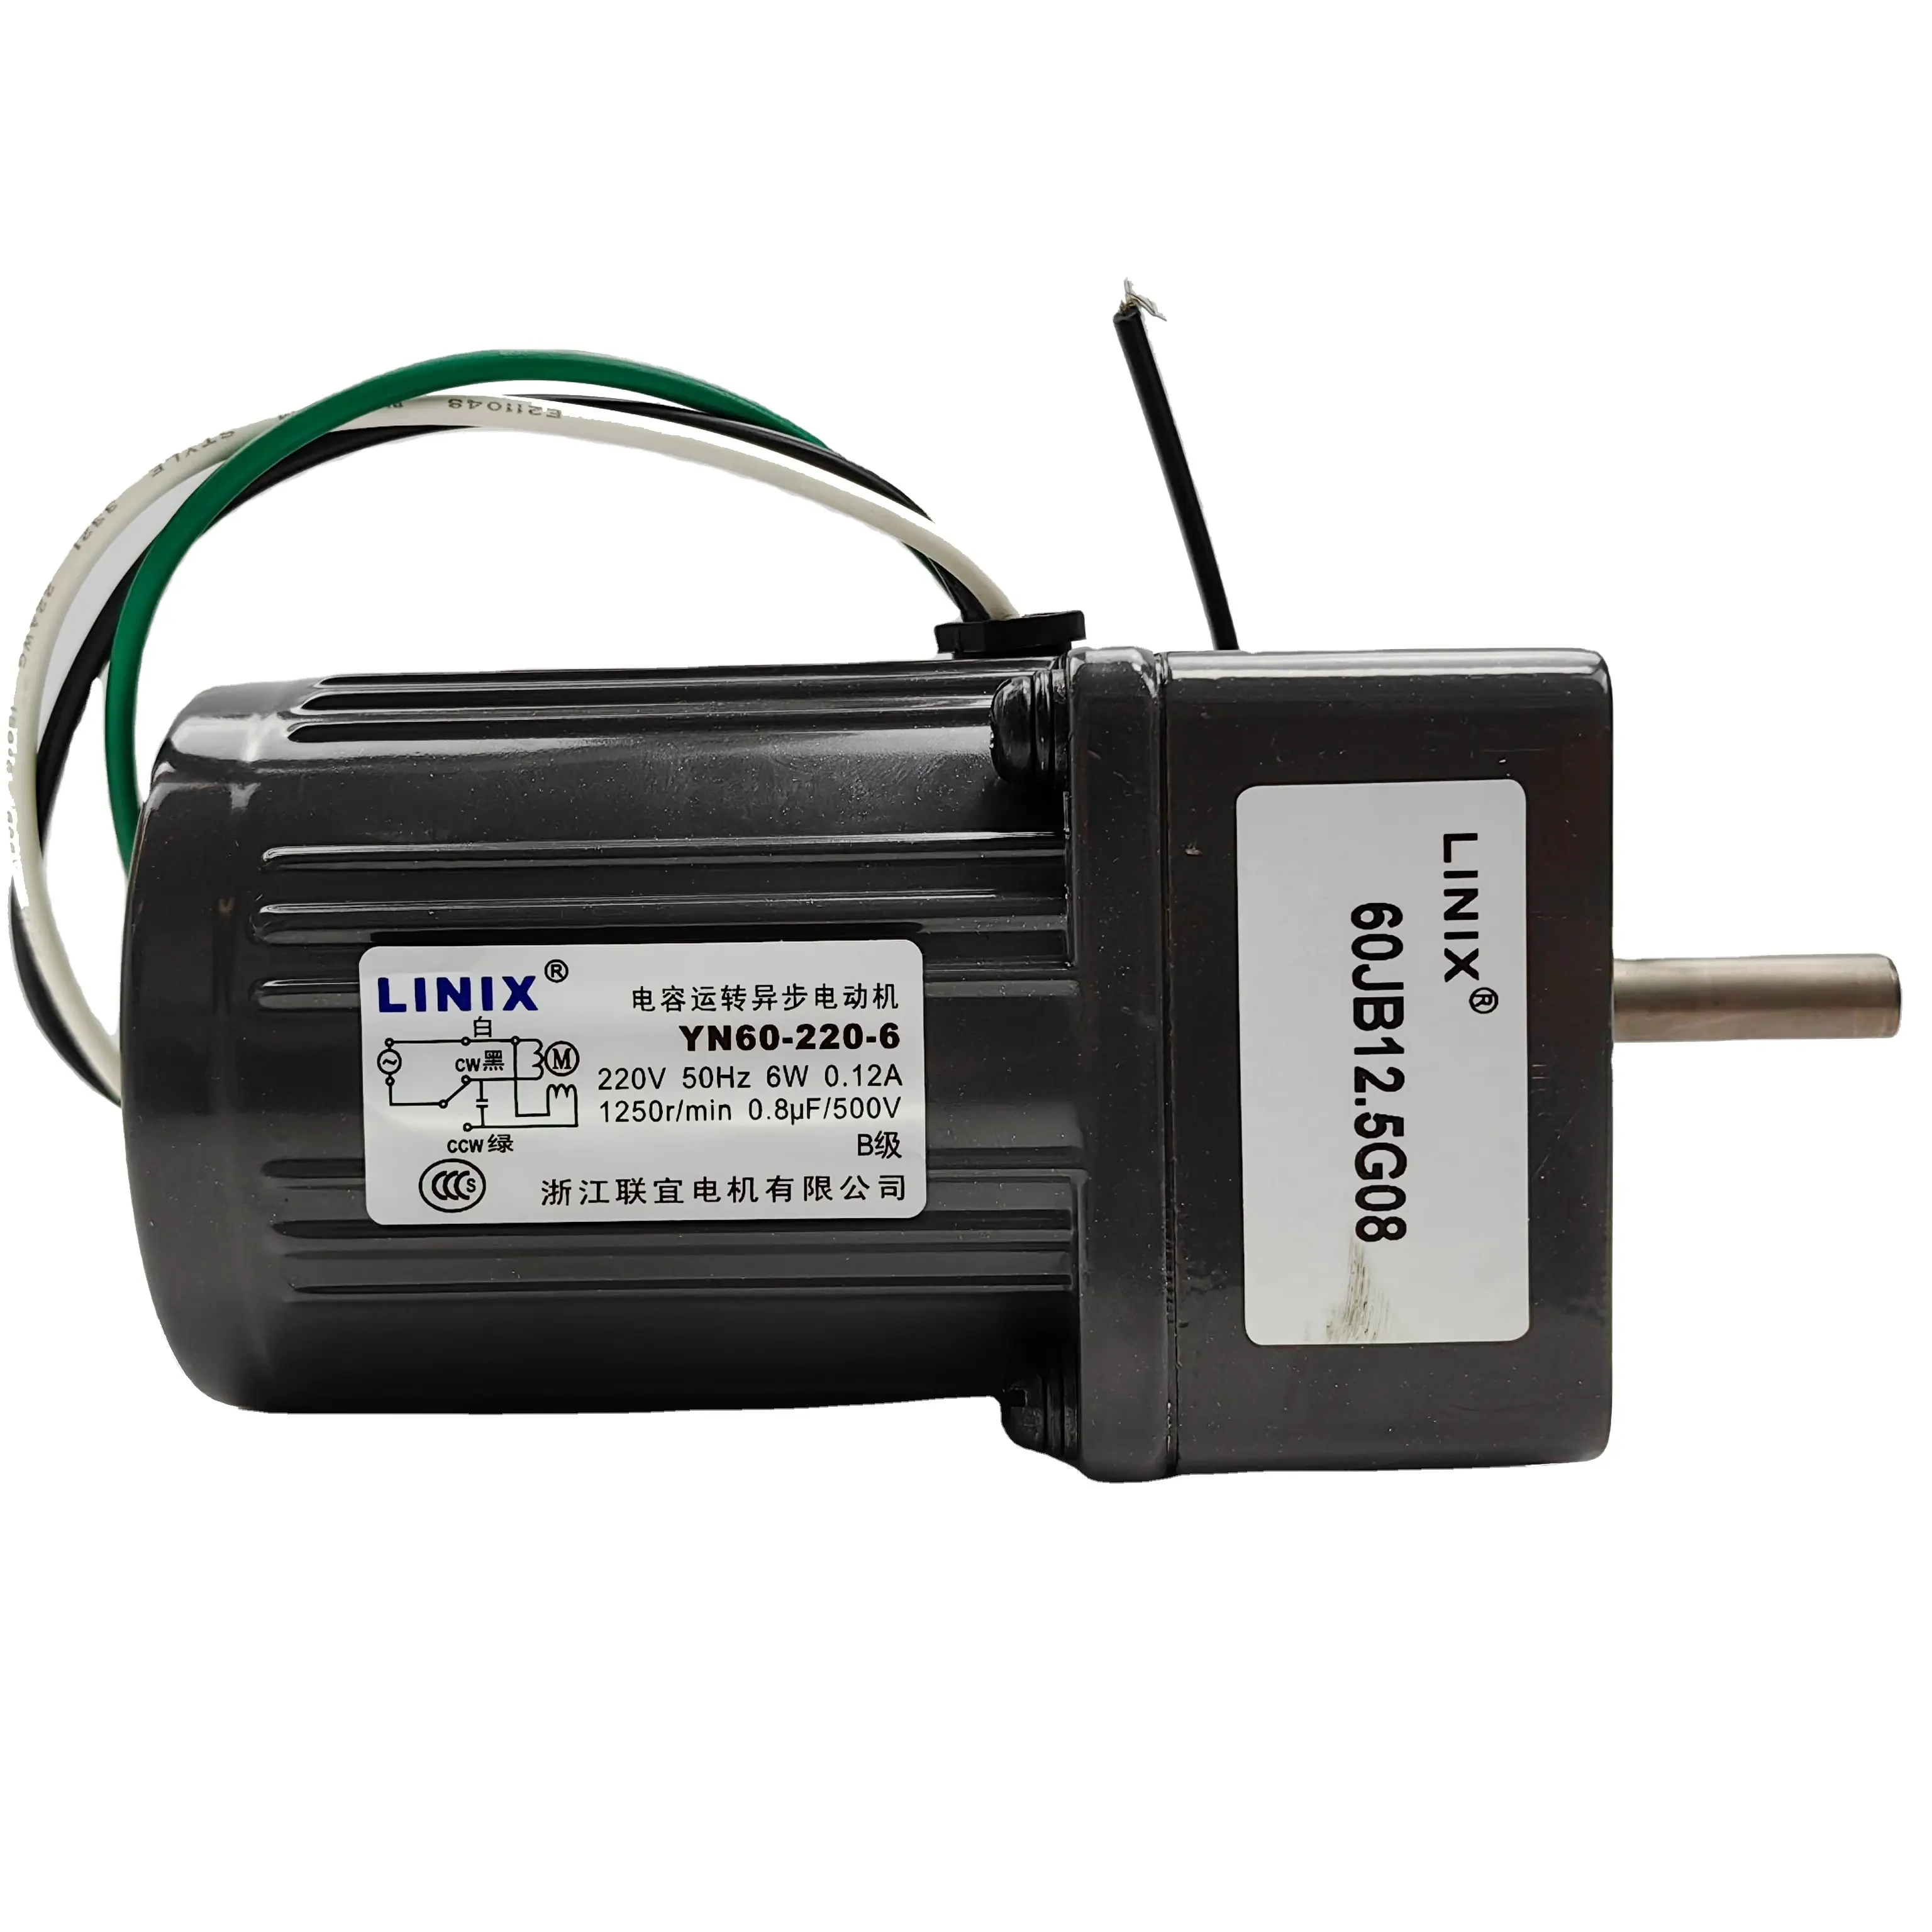 LINIX micro motor 6w ac electric motor YN60-6Z with damping braking used for frequent start-up conditions